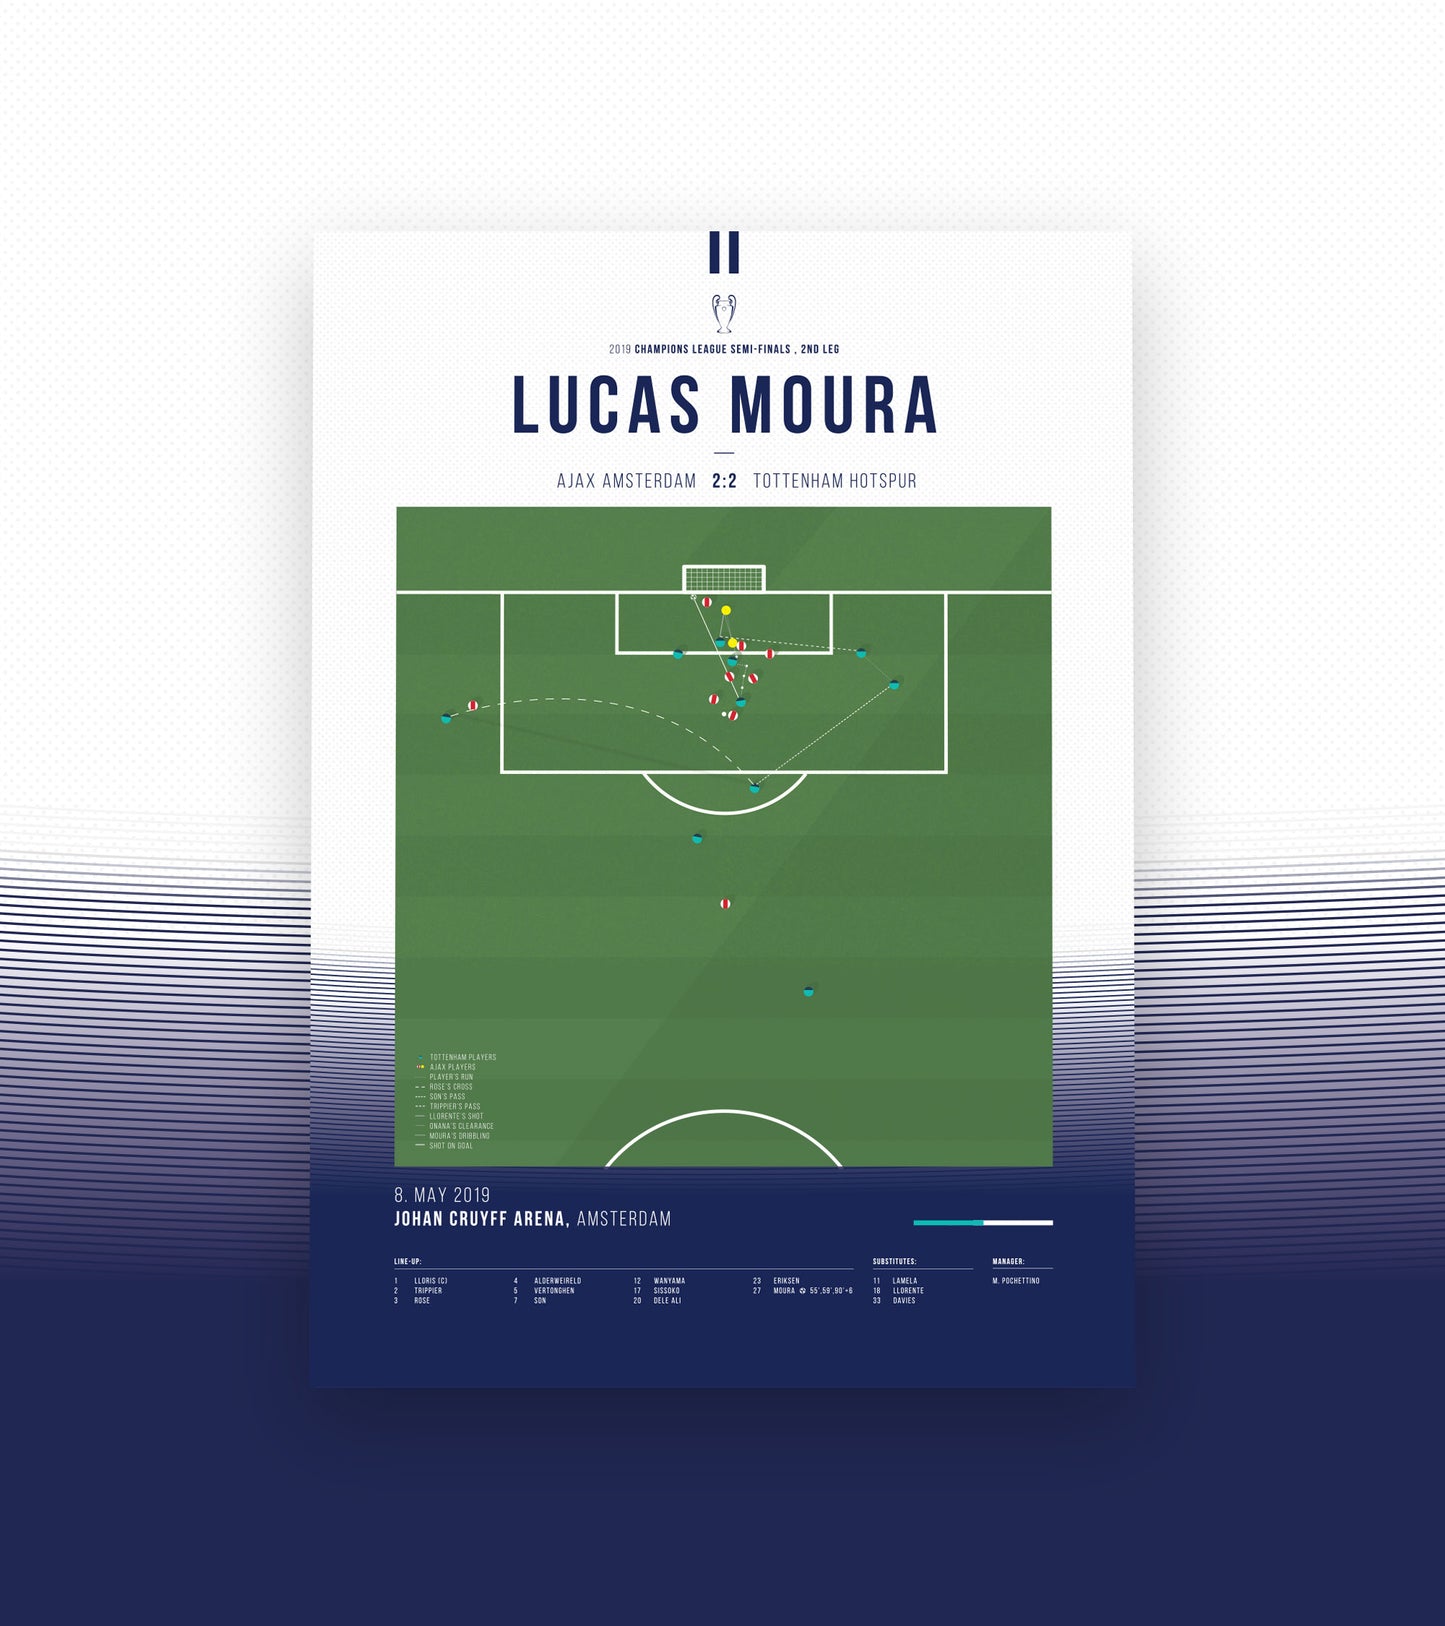 Lucas Moura's dramatic 96th-minute goal (2/3)